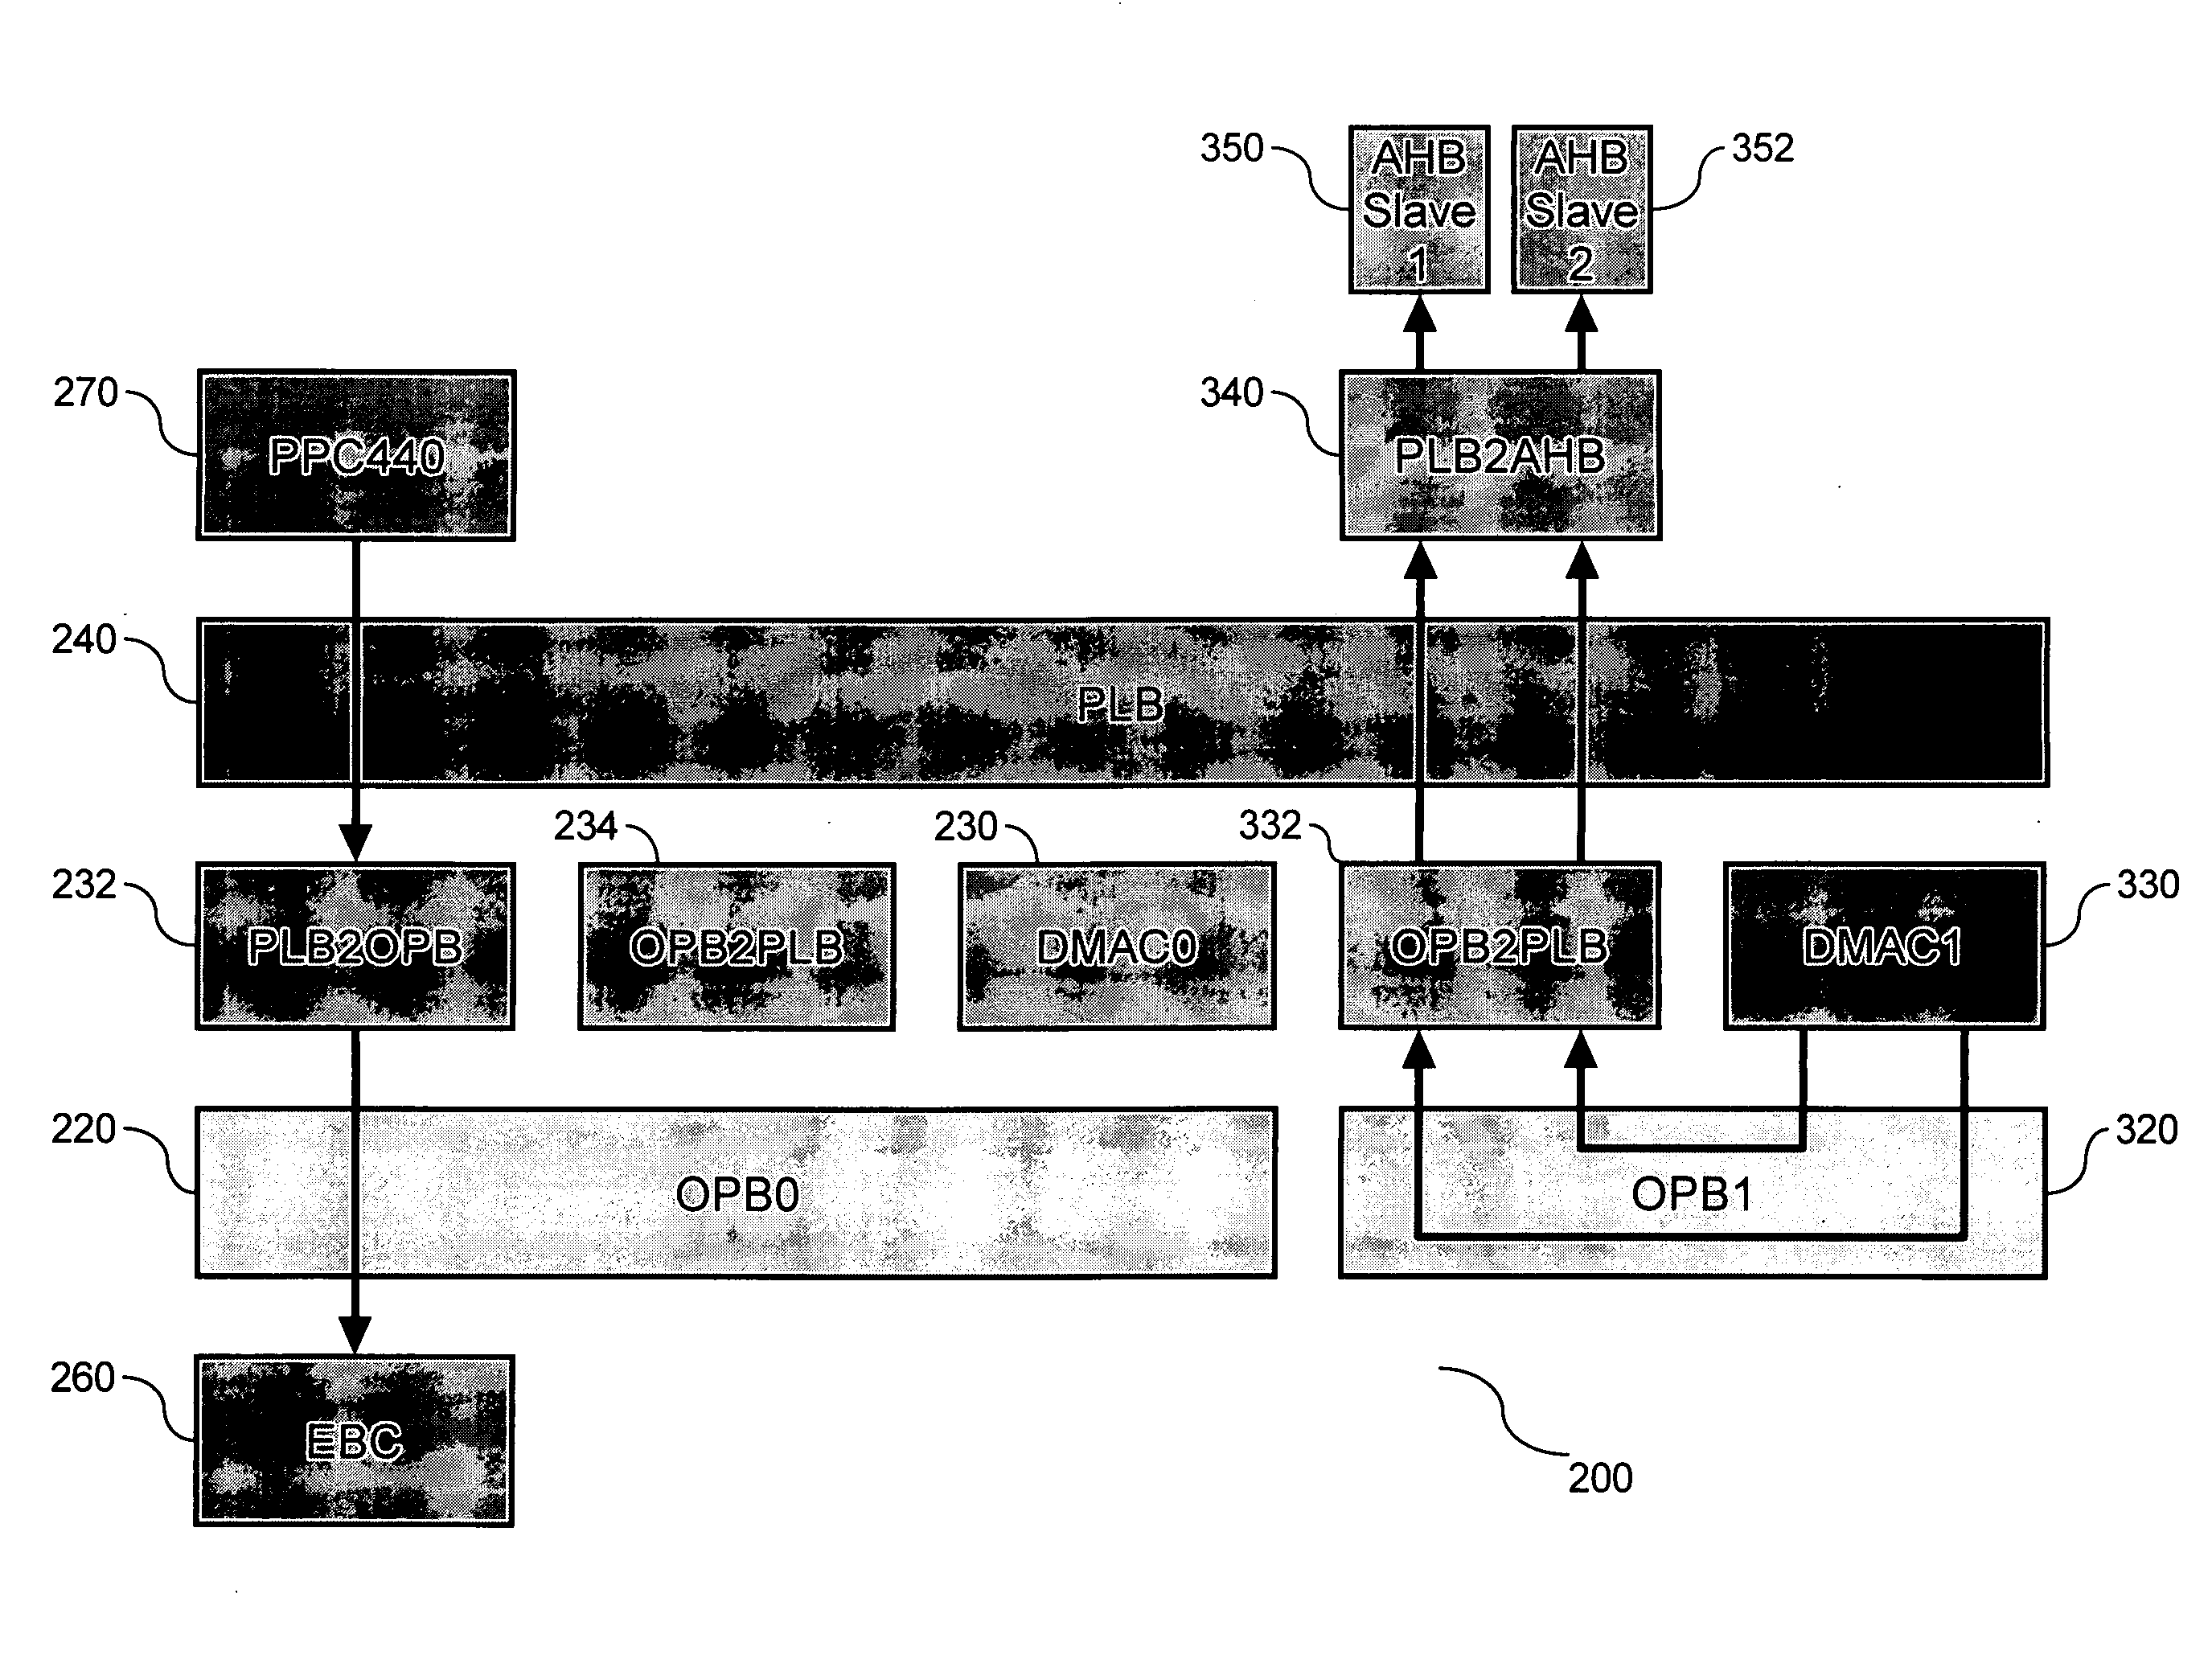 System-on-a-chip mixed bus architecture